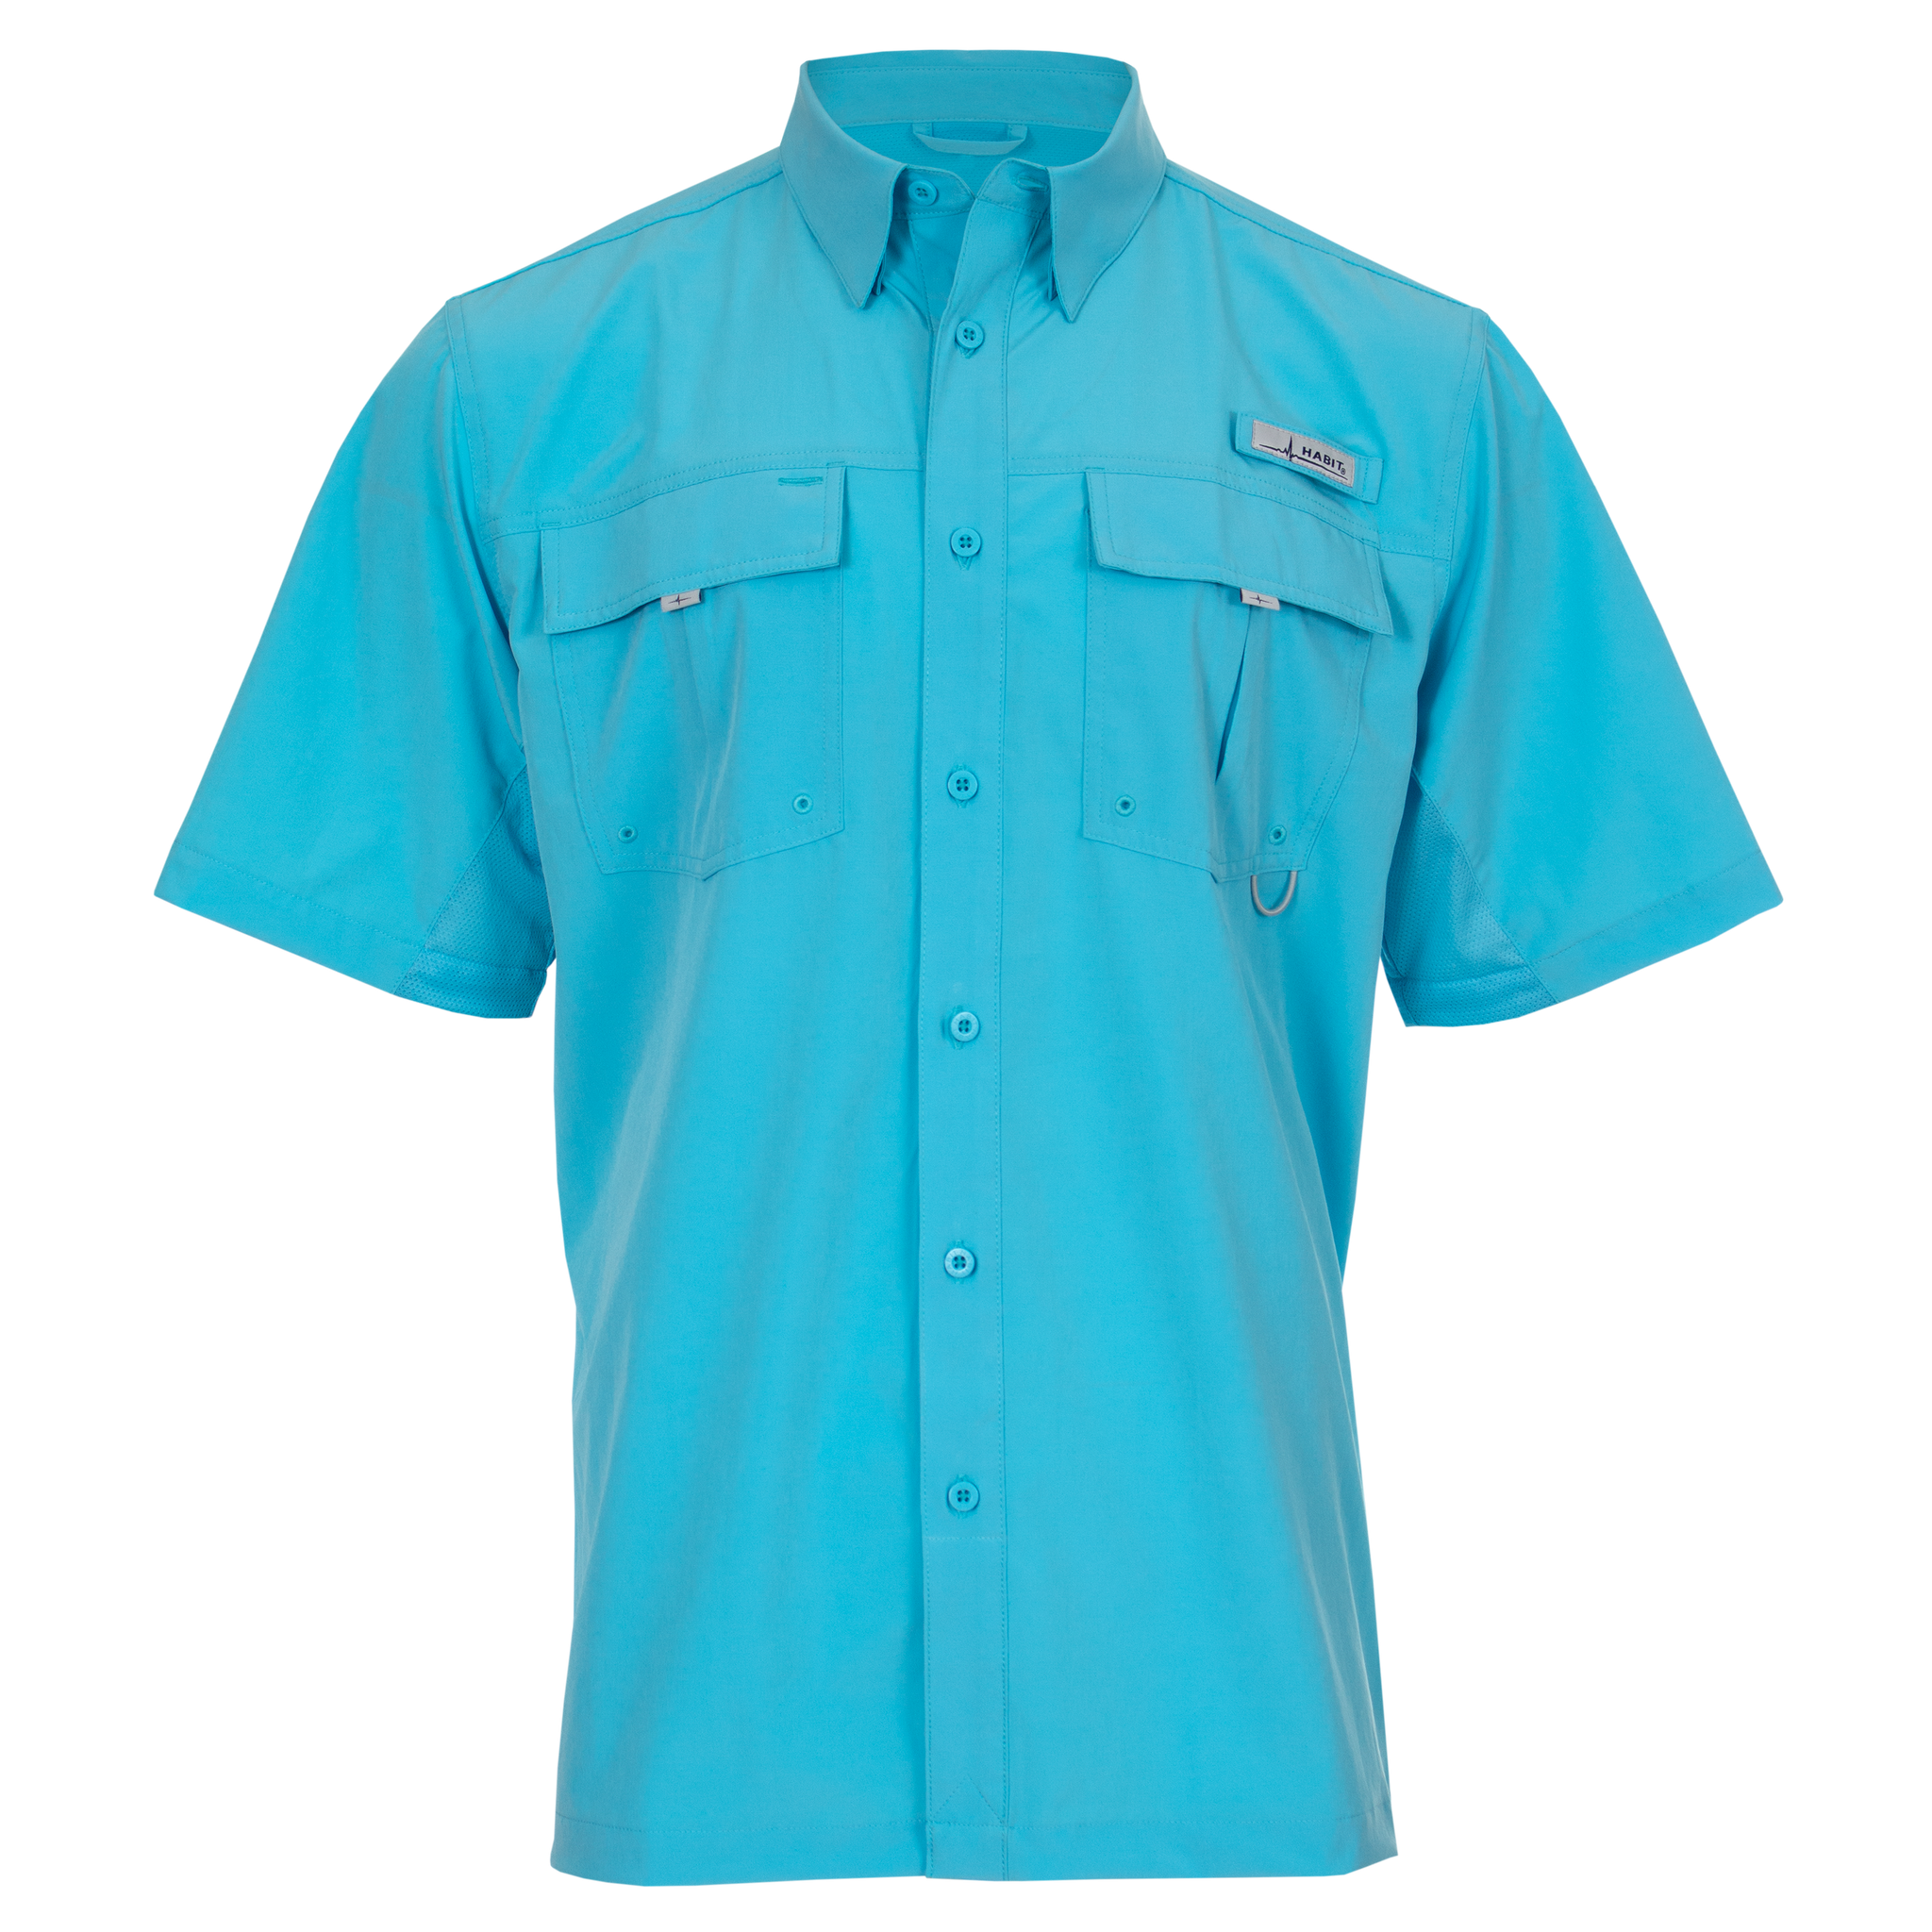 Men’s Forage River Short Sleeve River Guide Fishing Shirt Crystal Seas Front